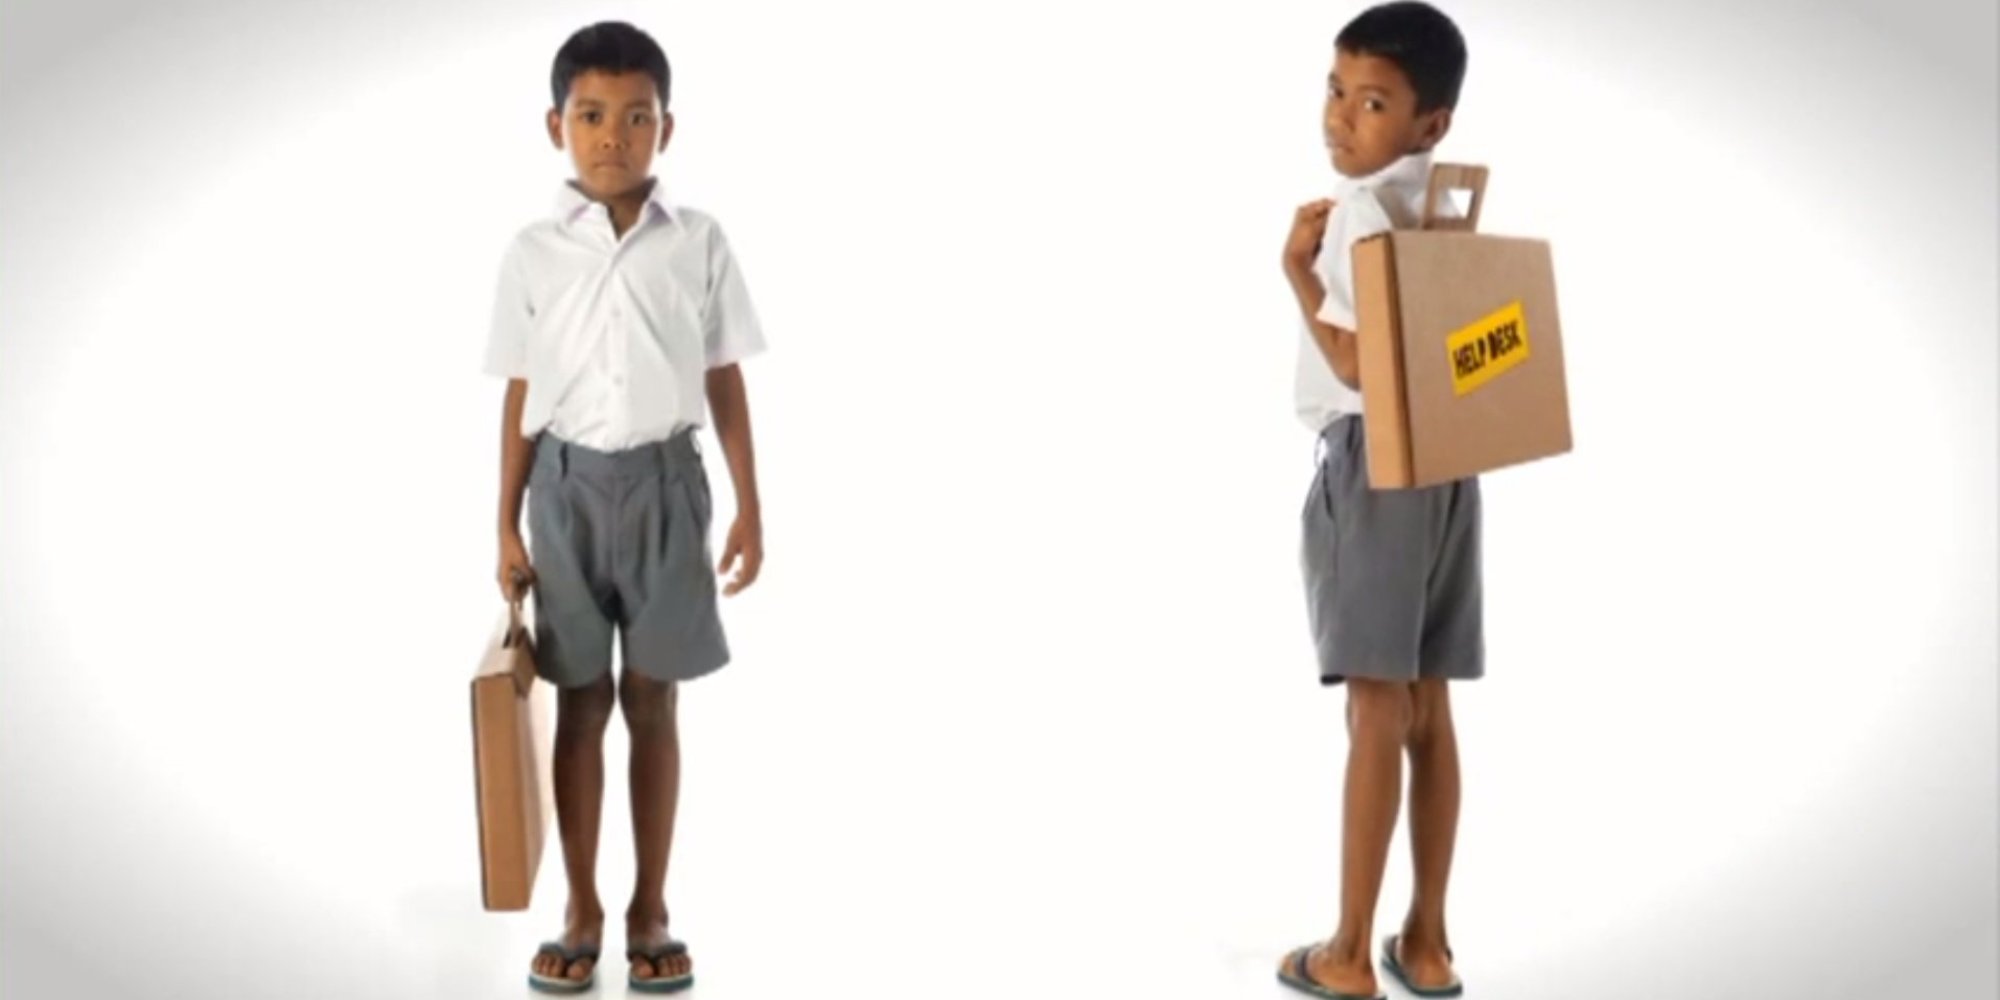 Recycled Cartons Create Genius Desks That Double As Backpacks For Needy Kids In India2000 x 1000